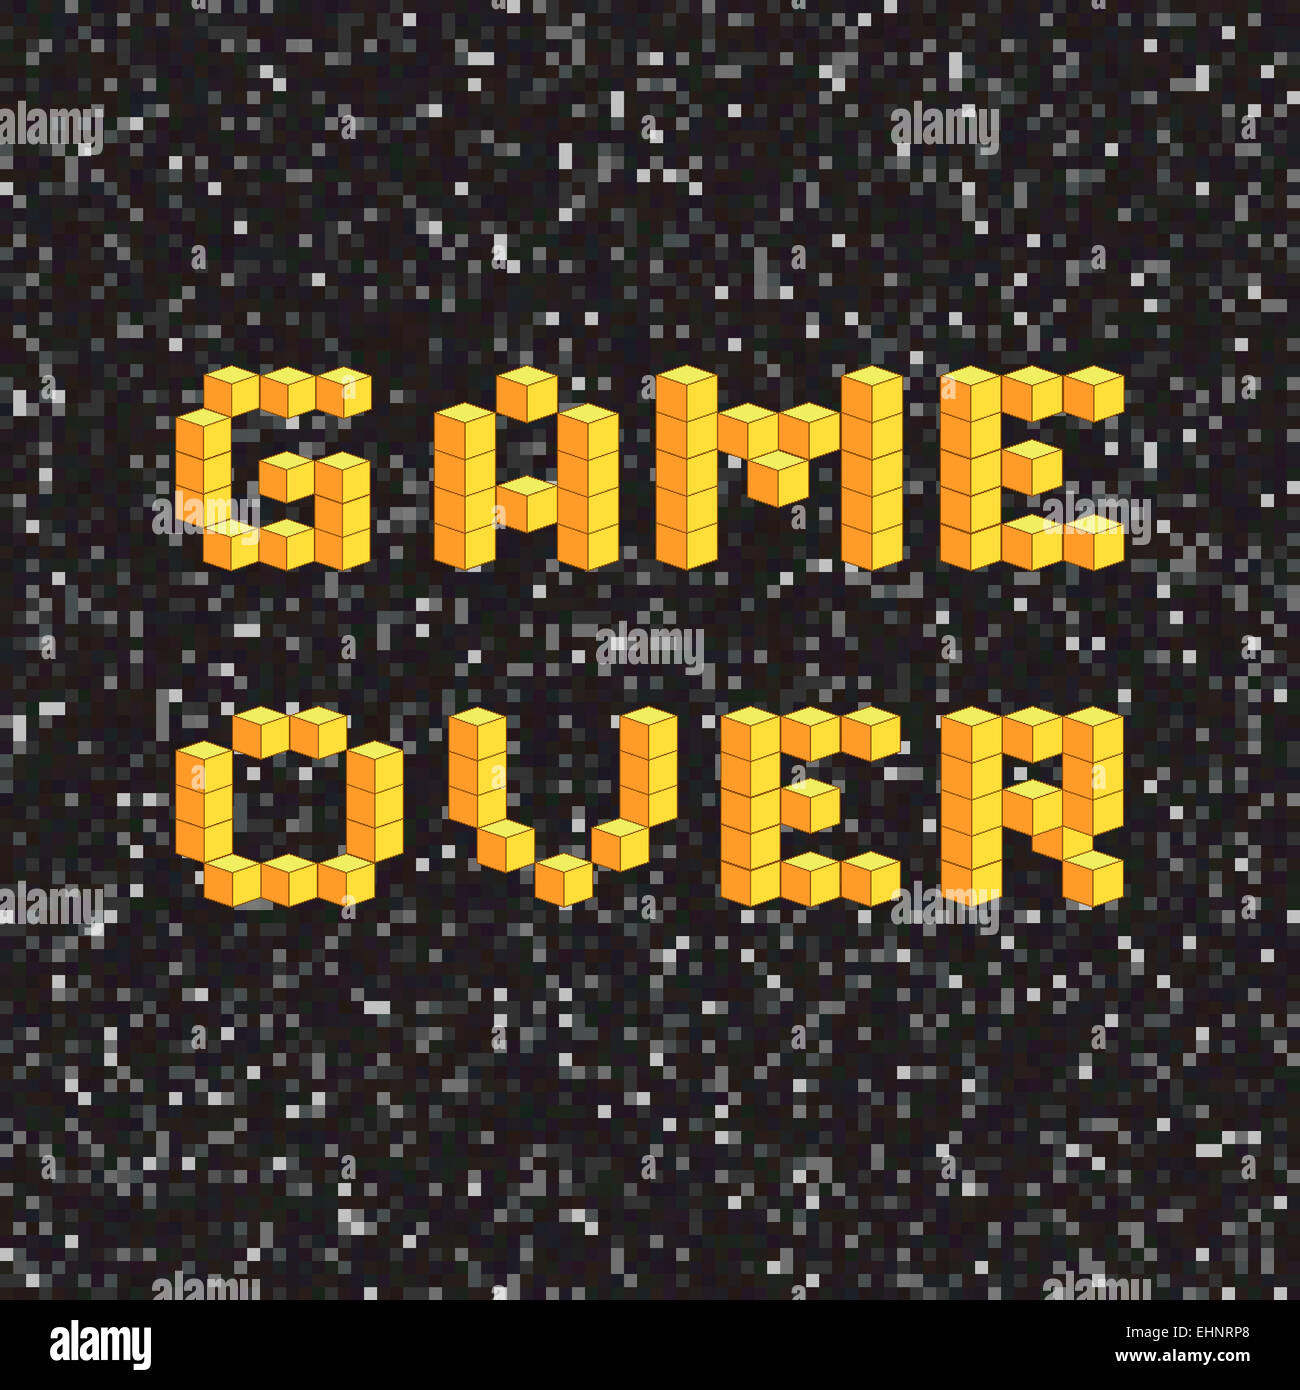 Game over screen, old school gaming poster, failure concept Stock Photo